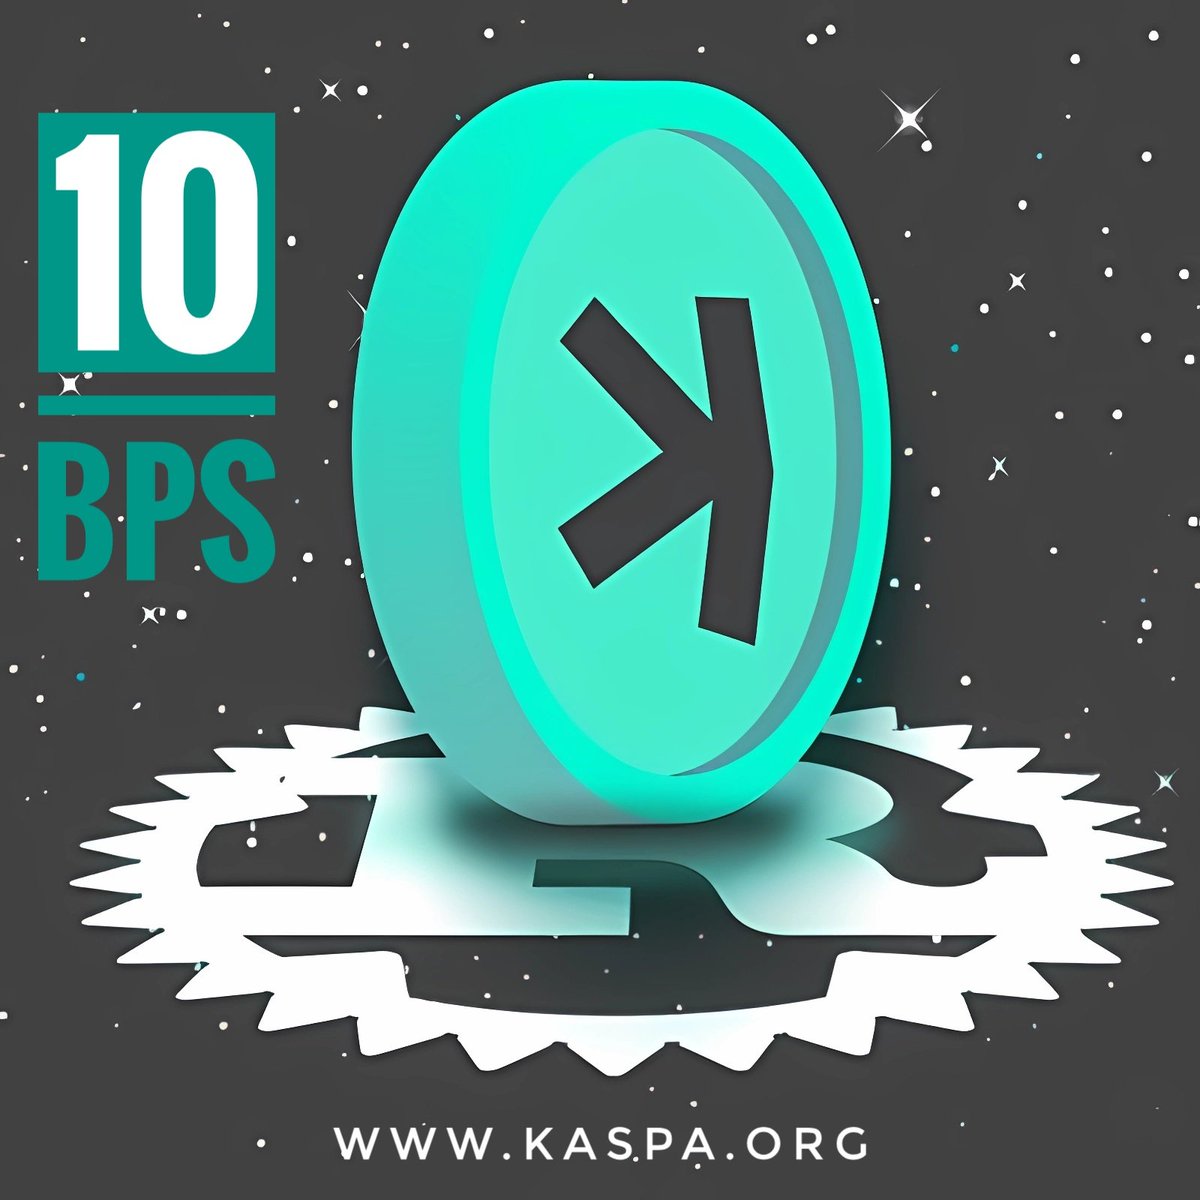 $KAS #Kaspa 
- The First Ever Trilemma Solver 
- The First Ever BlockDAG (Not Blockchain)
- 100% Fair Launched (Nov 7, 2021)
- 100% Decentralized
- Energy Efficient Proof-Of-Work Mining
- 1 BPS, Soon to be 10 BPS, Eventually 100 BPS
#DigitalSilver #DagKnight #Bitcoin #Ethereum